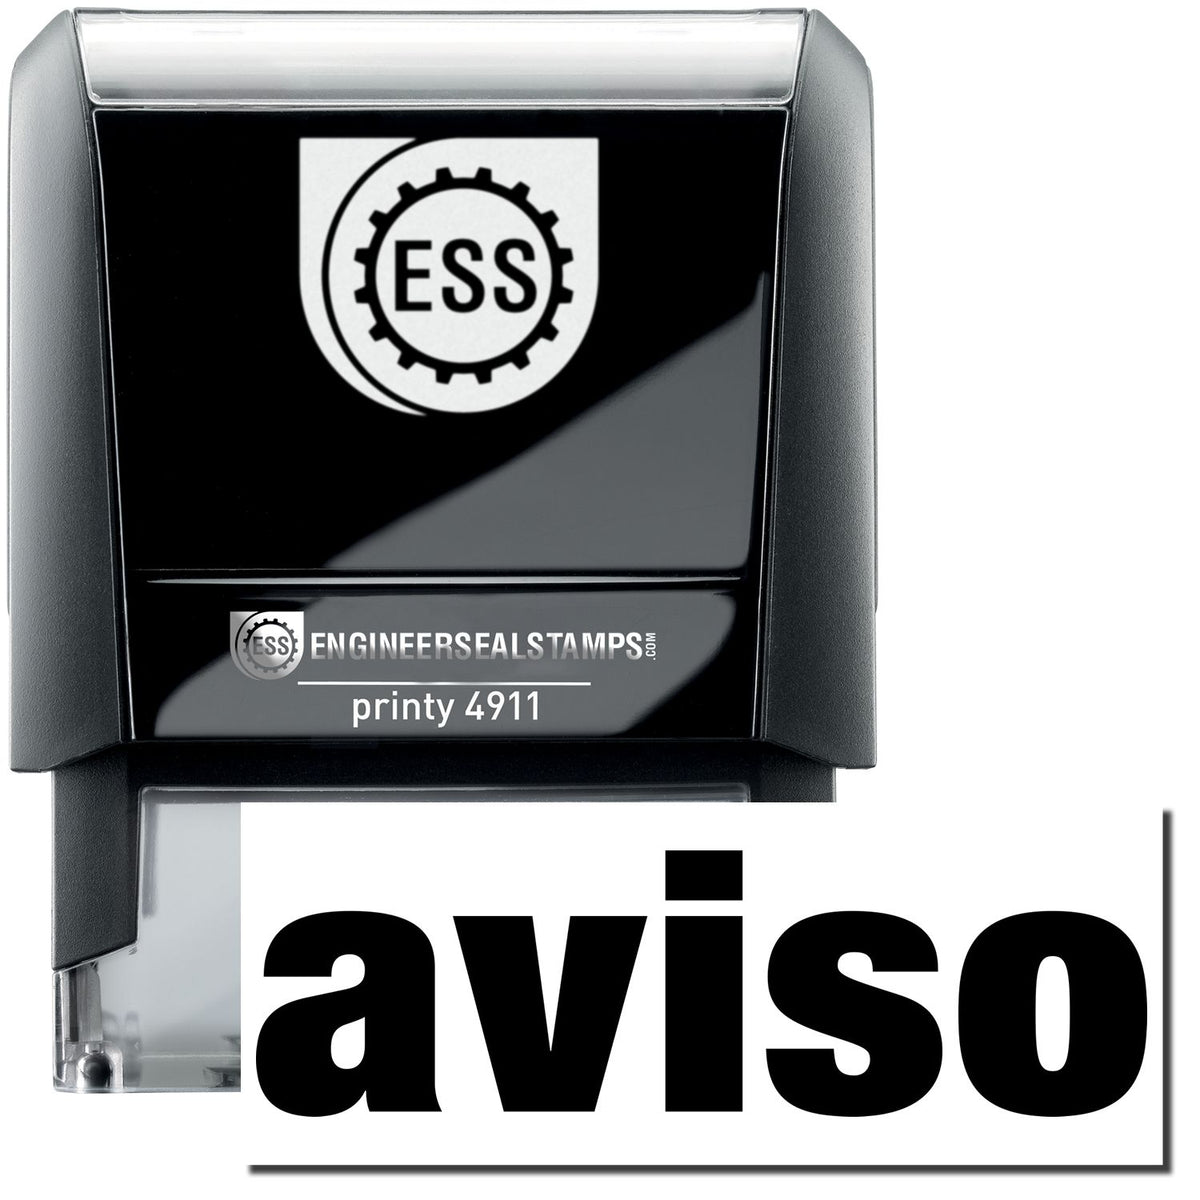 A self-inking stamp with a stamped image showing how the text &quot;aviso&quot; is displayed after stamping.